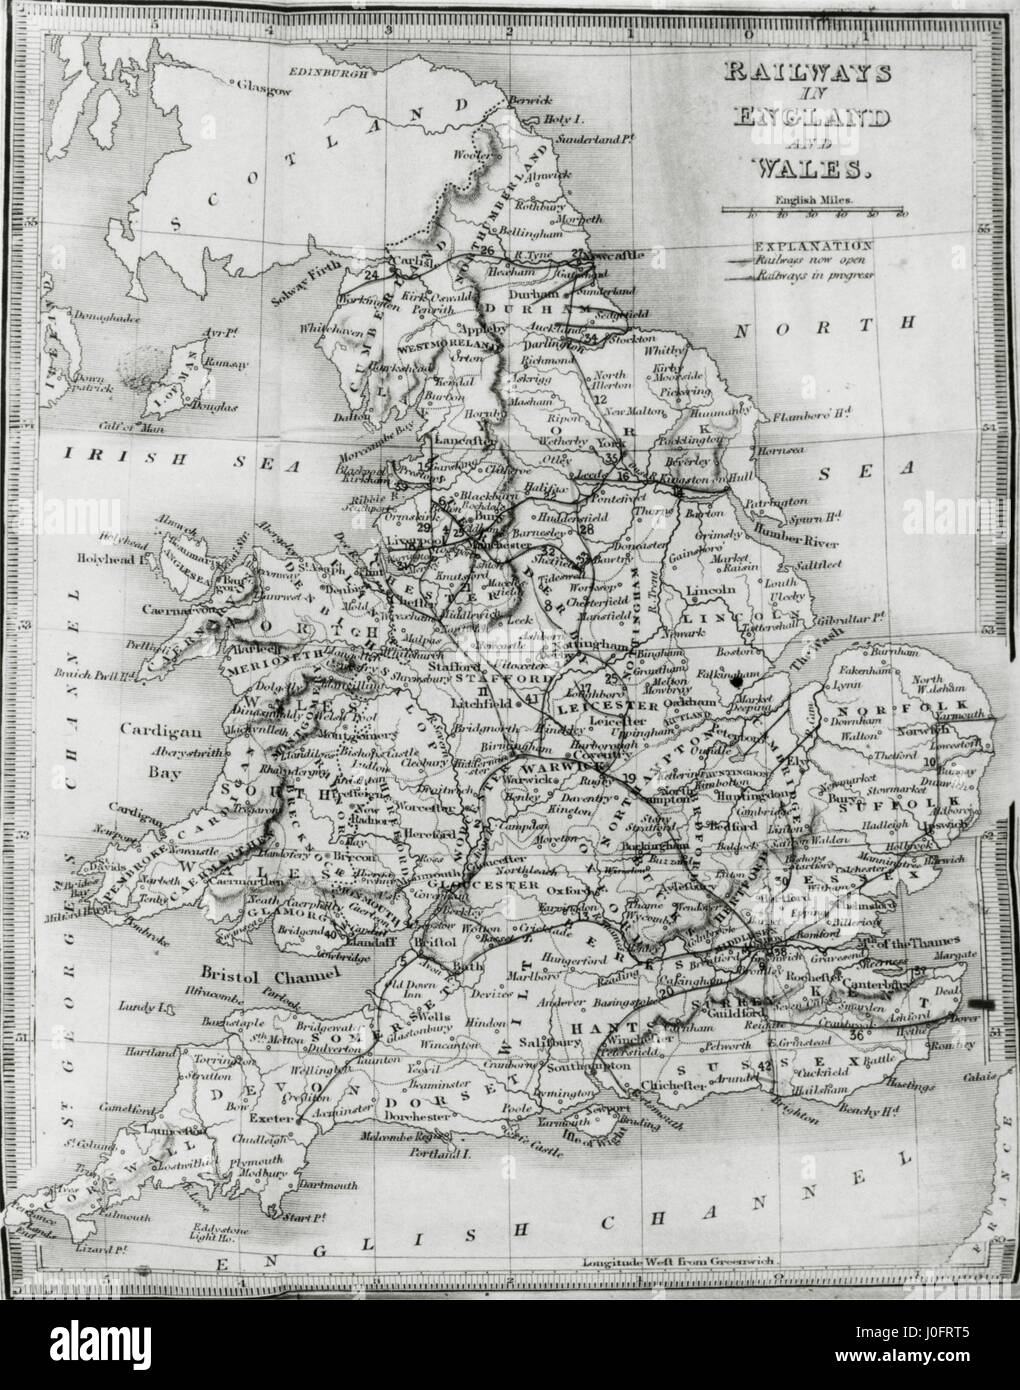 Map of railways in England and Wales, from Bradshaw's Railway Guide Stock Photo